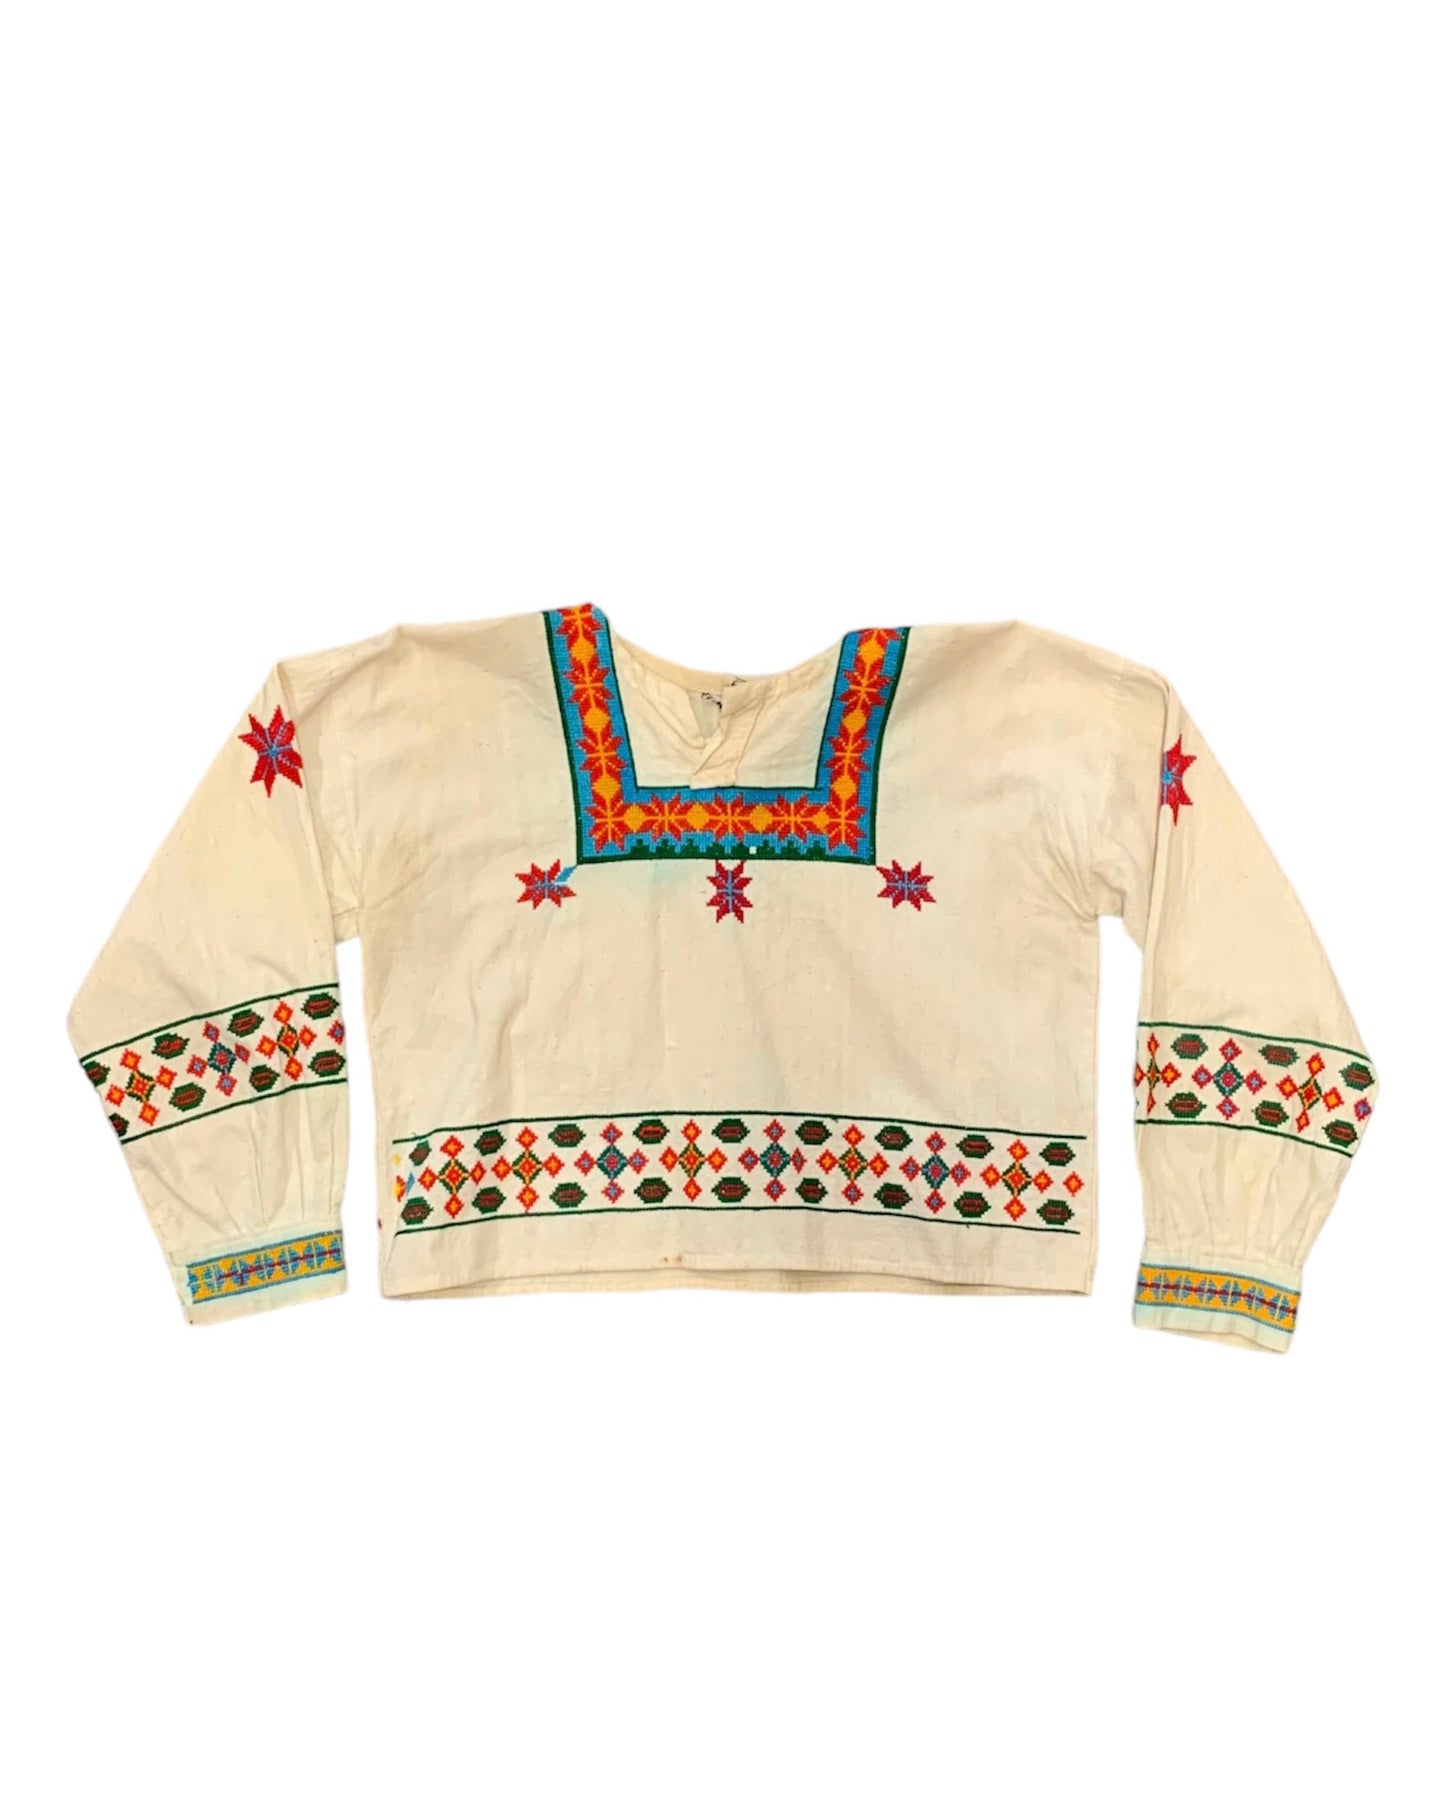 Handmade 1970s Embroidered Crop Blouse by the Huichol